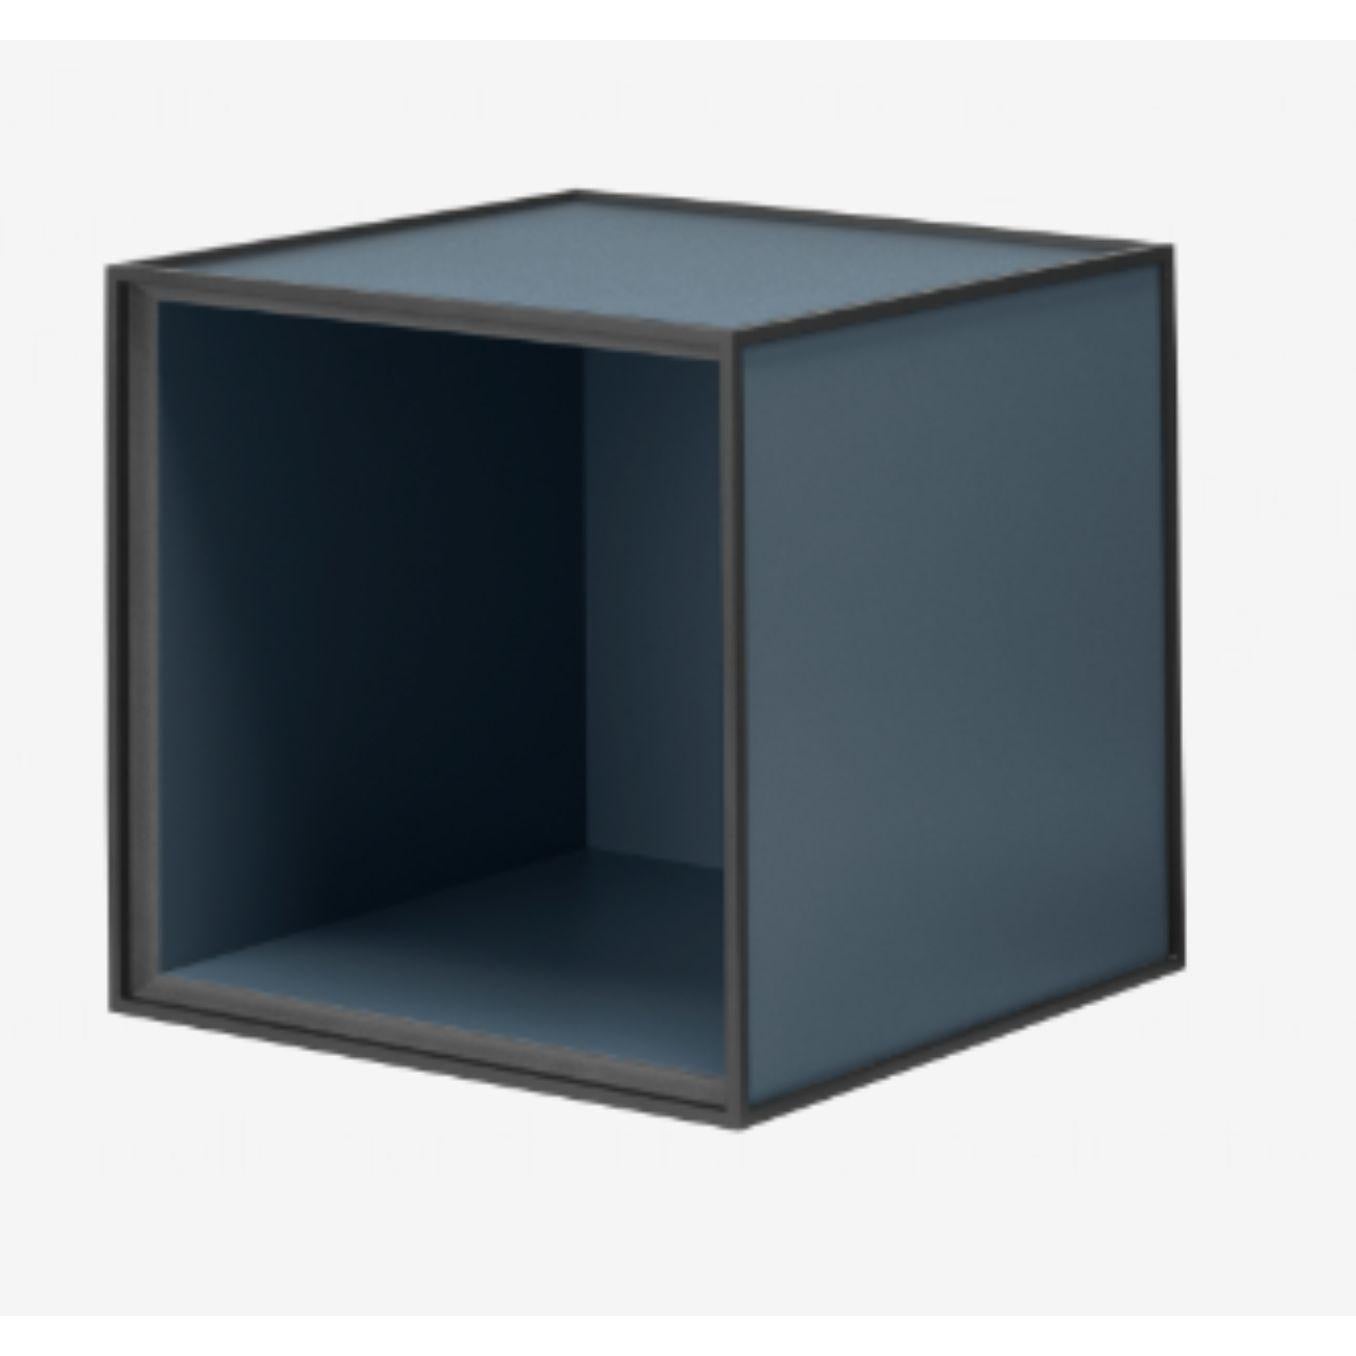 Other 28 Black Ash Frame Box by Lassen For Sale